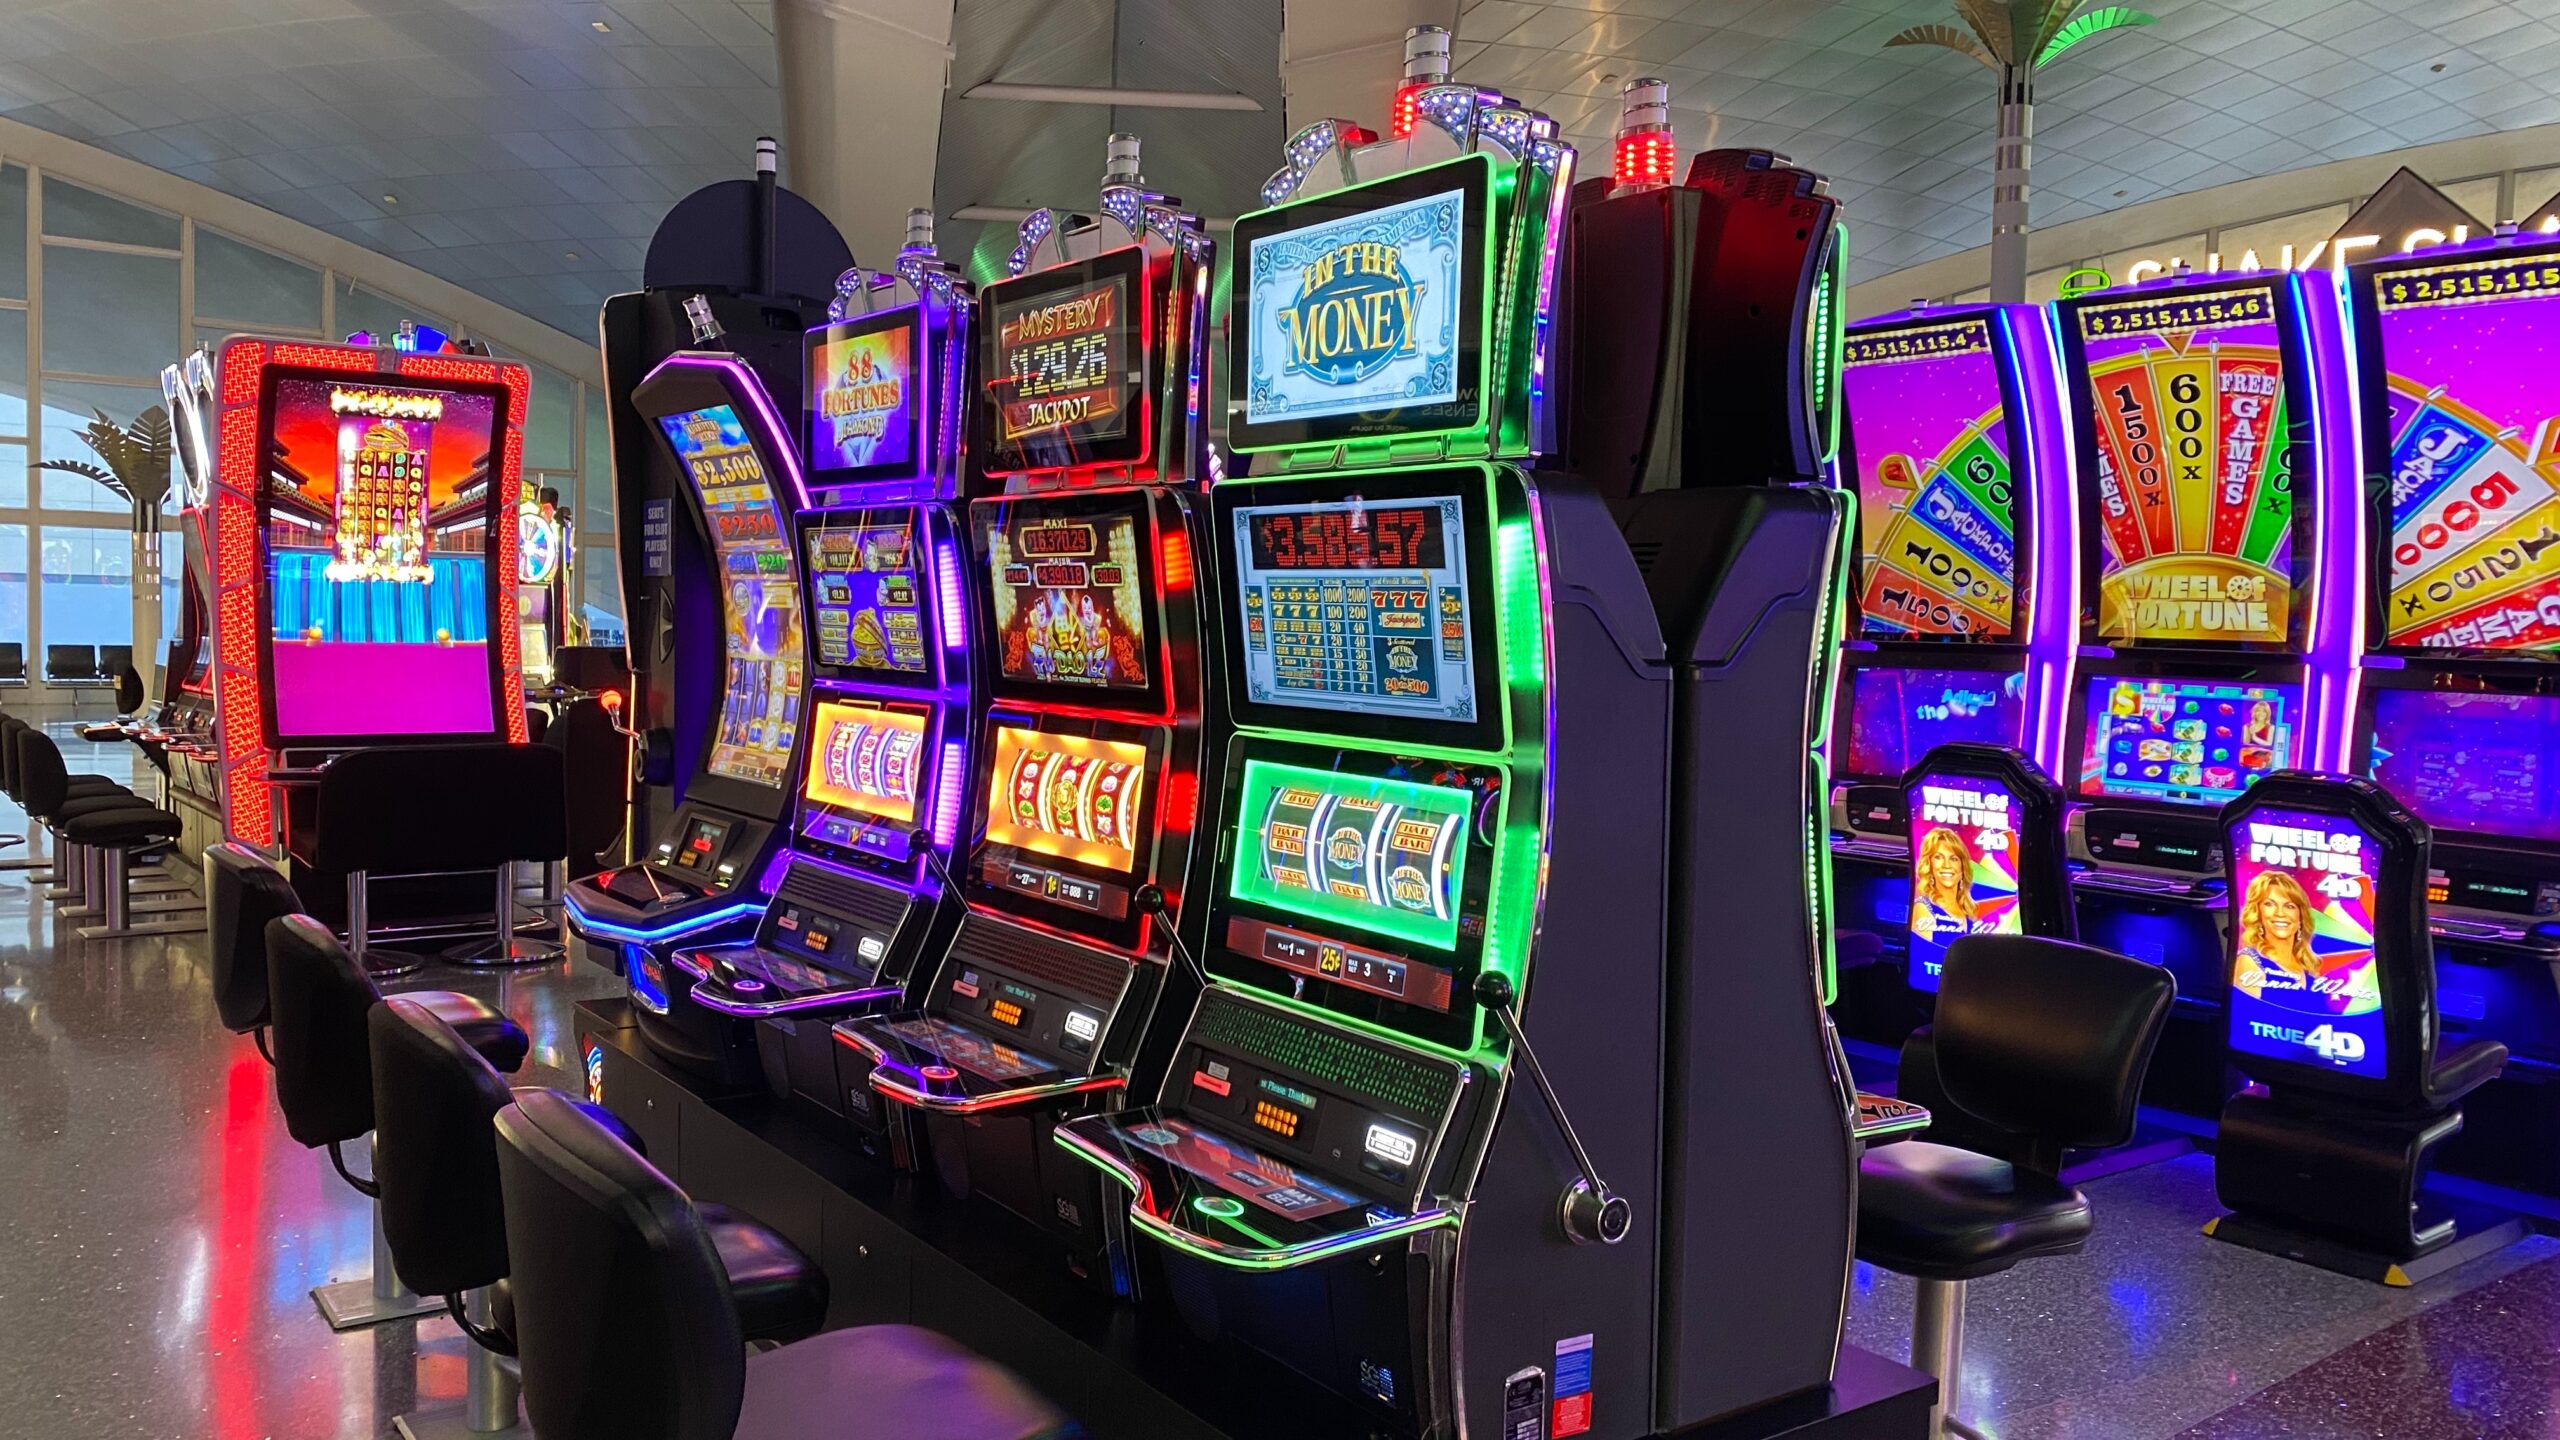 The Evolution of Slot Machines From Lever Mechanisms to Digital Displays